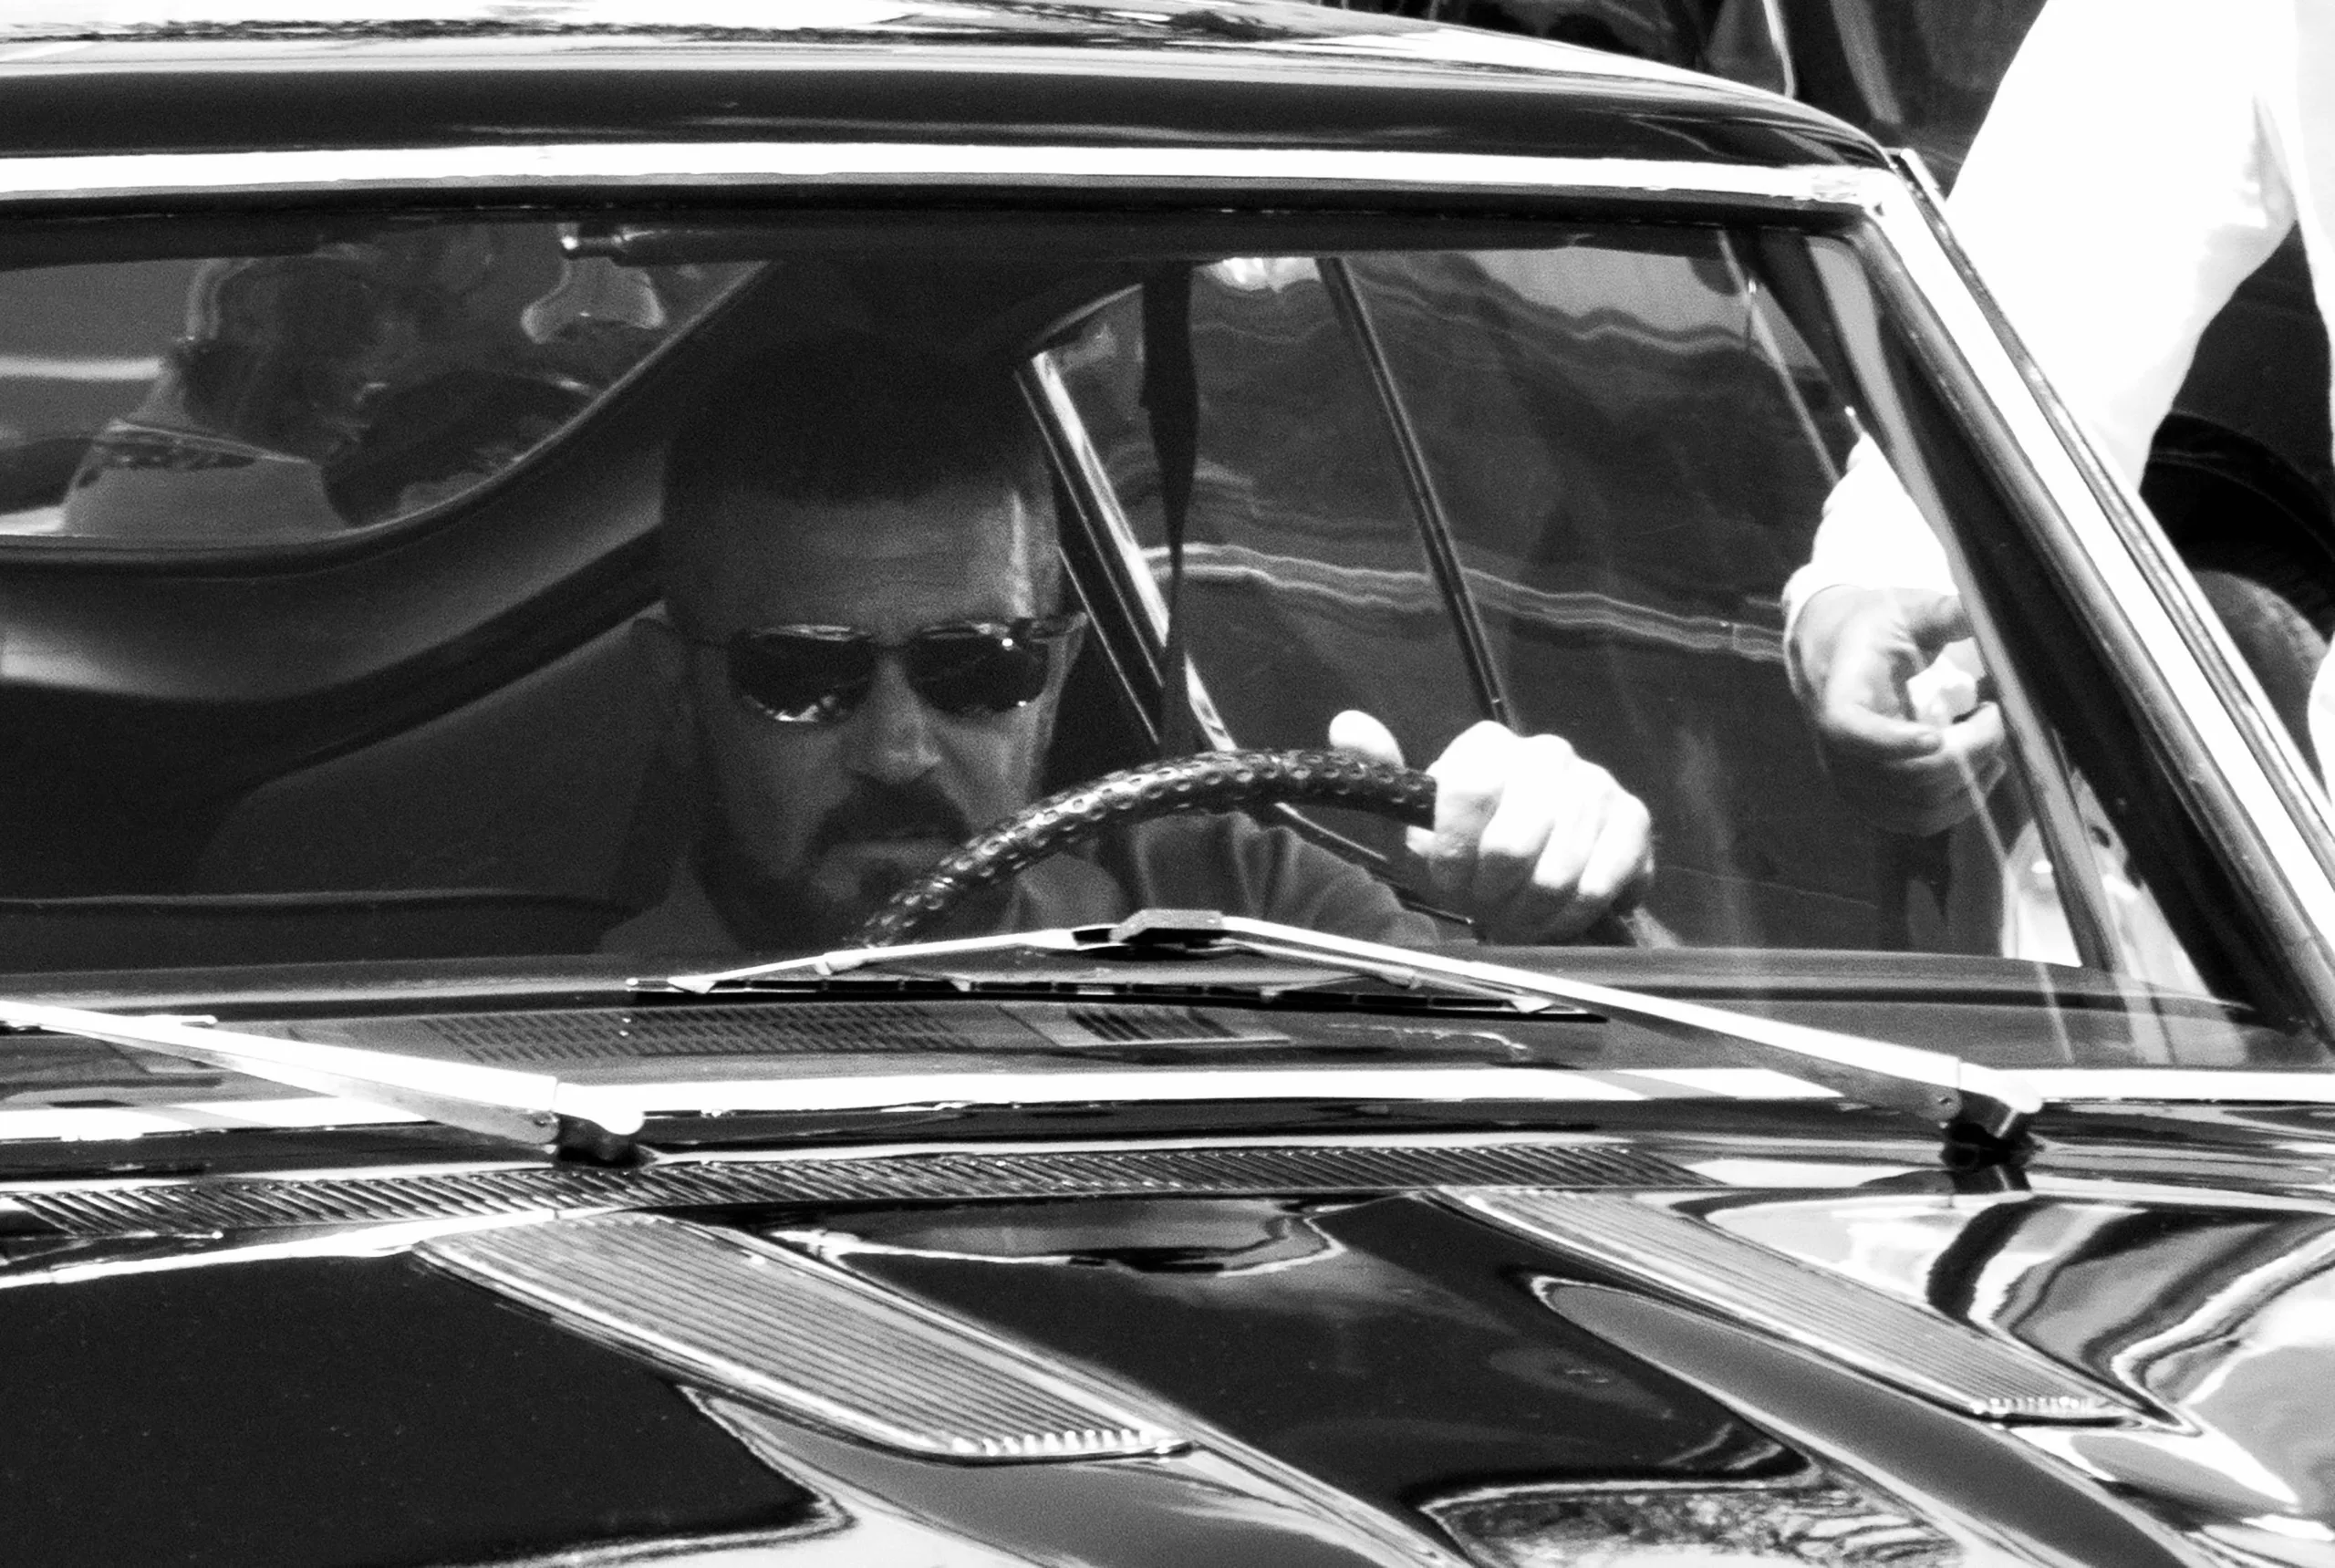 Antonio Banderas sitting in his car in The Enforcer Filming in Greece - Pictures by Alkis Ischnopoulos